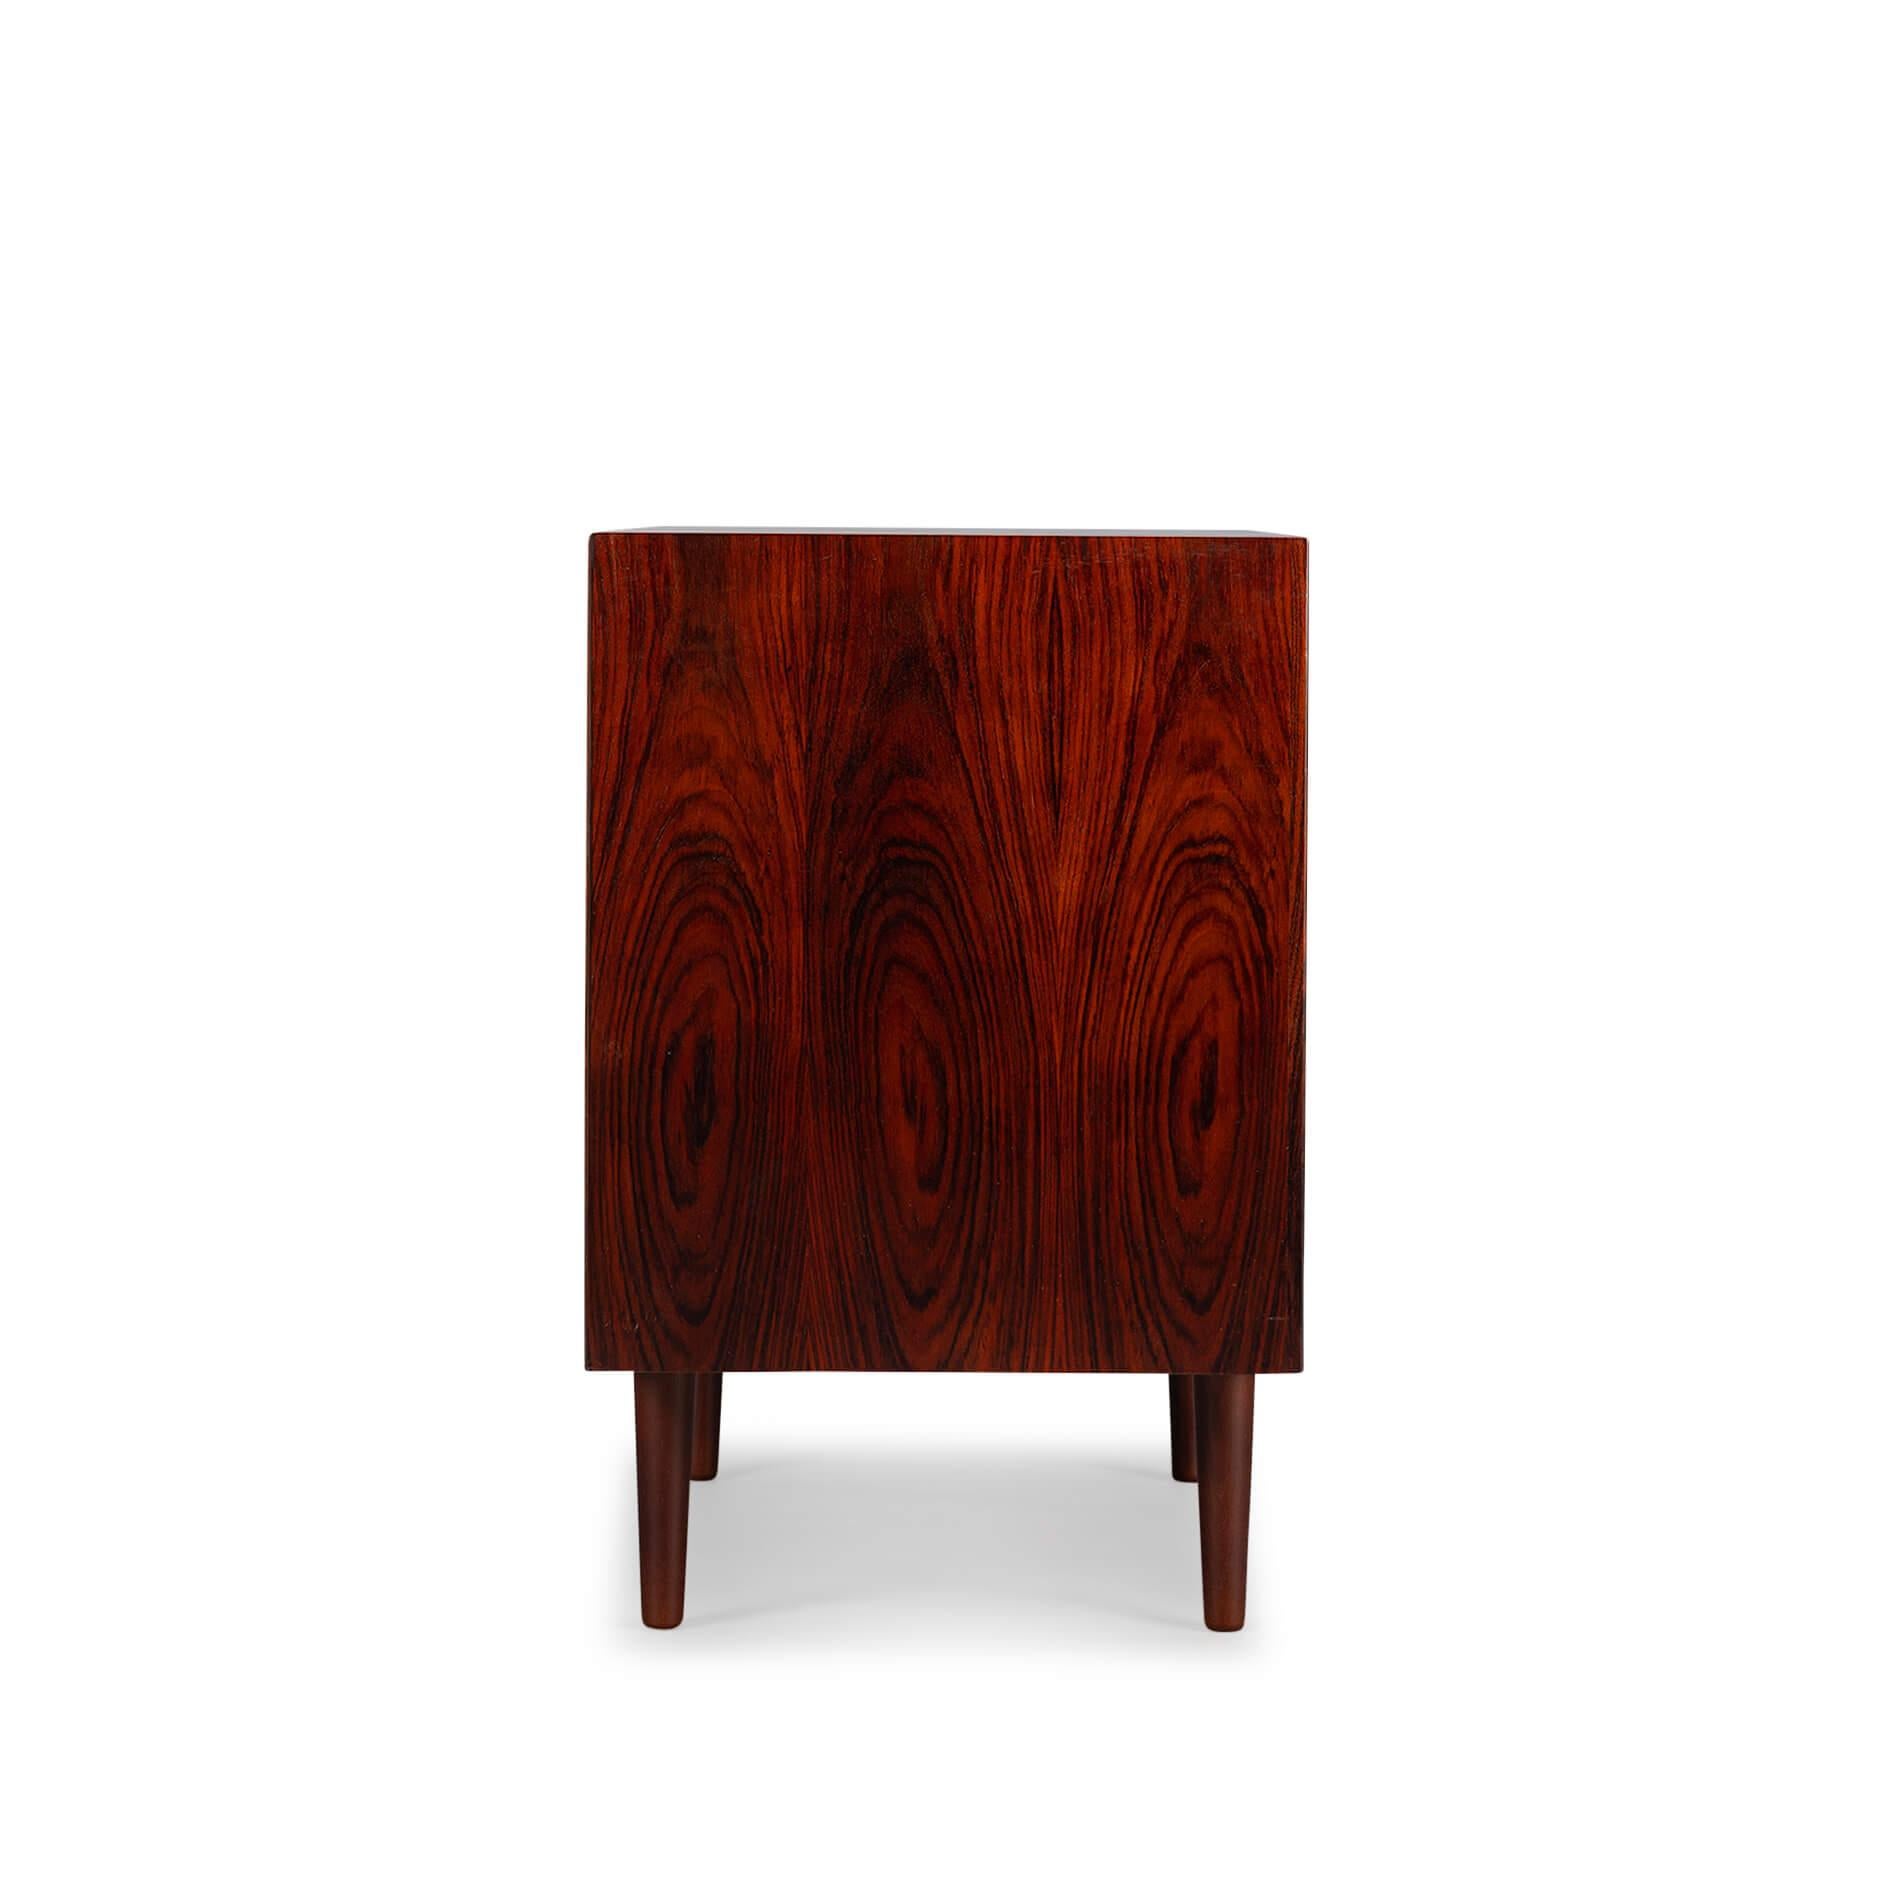 Mid-Century Modern Small Midcentury Rosewood Sideboard by E. Brouer for Brouer Møbelfabrik, 1960s For Sale